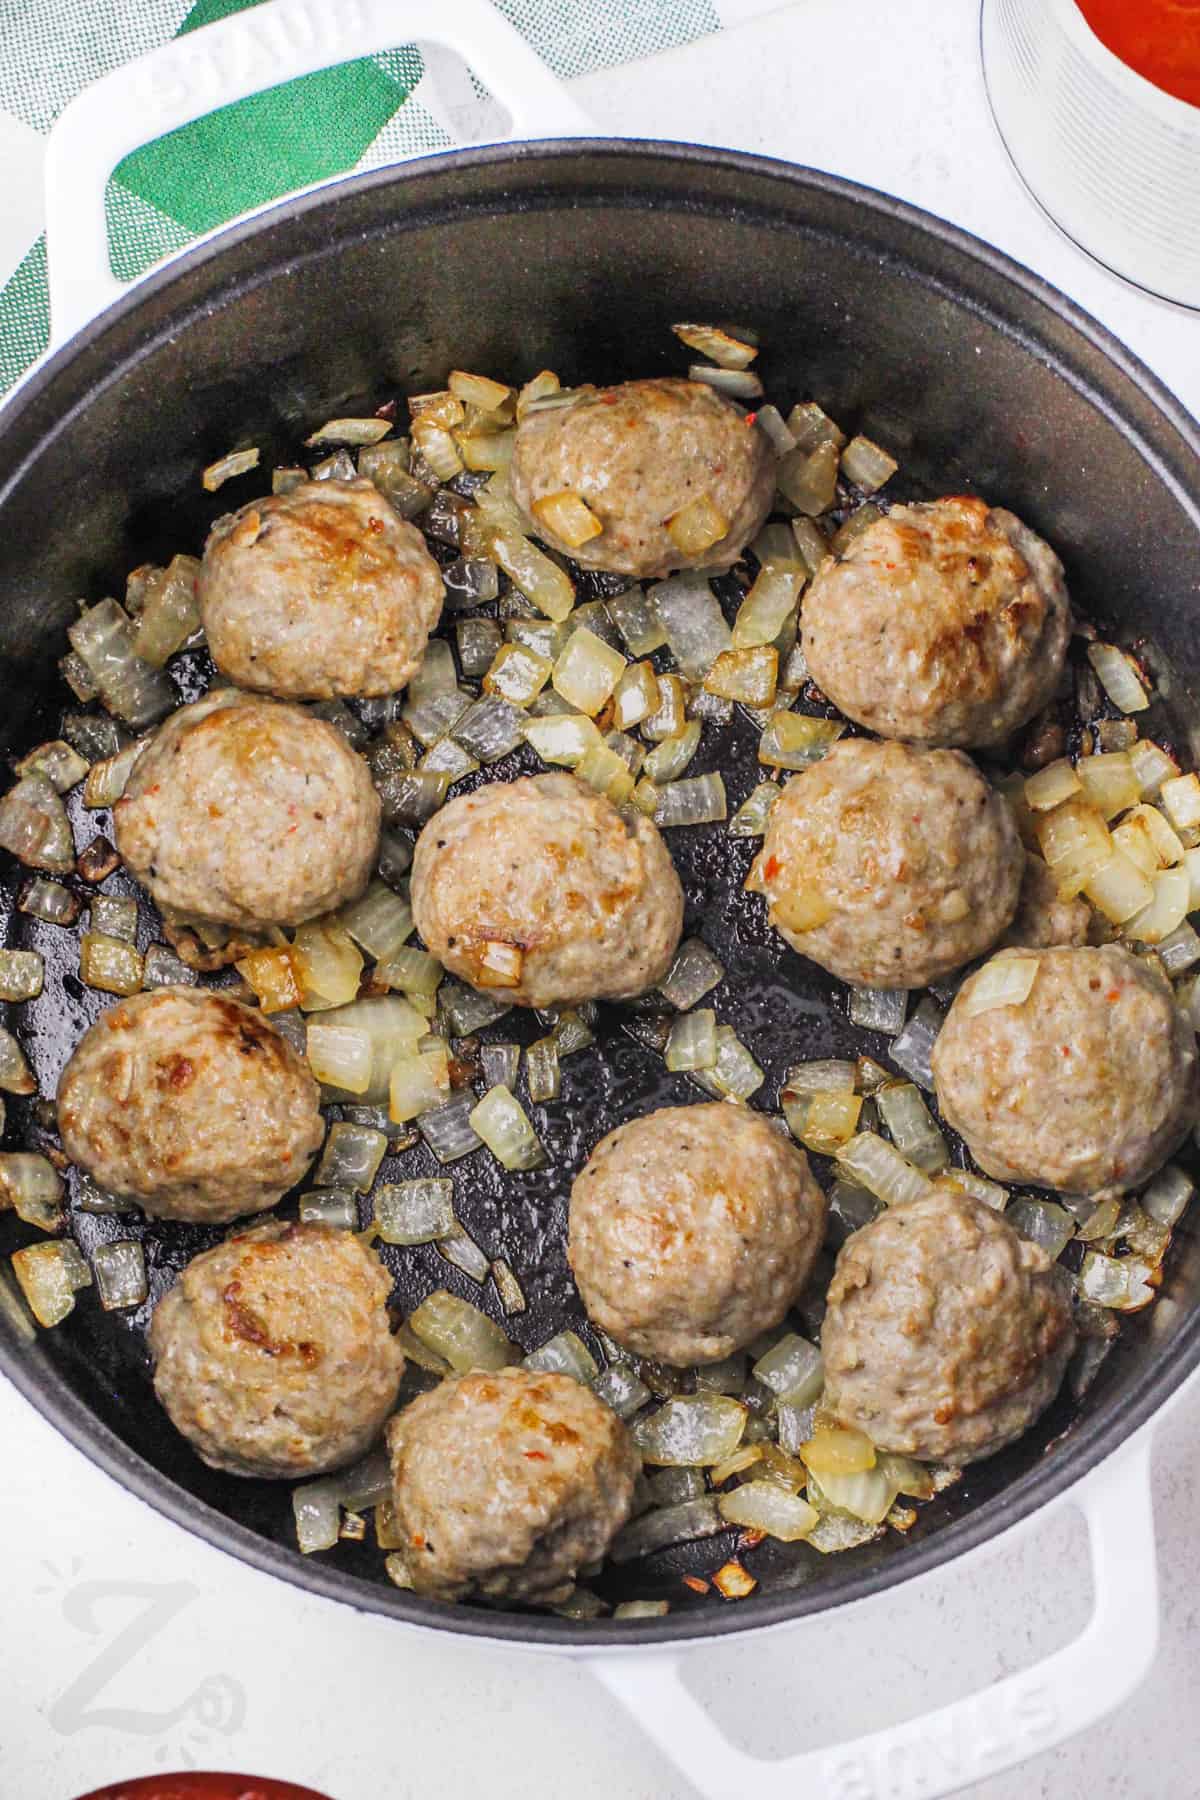 meatballs being cooked in a frying pan with onions